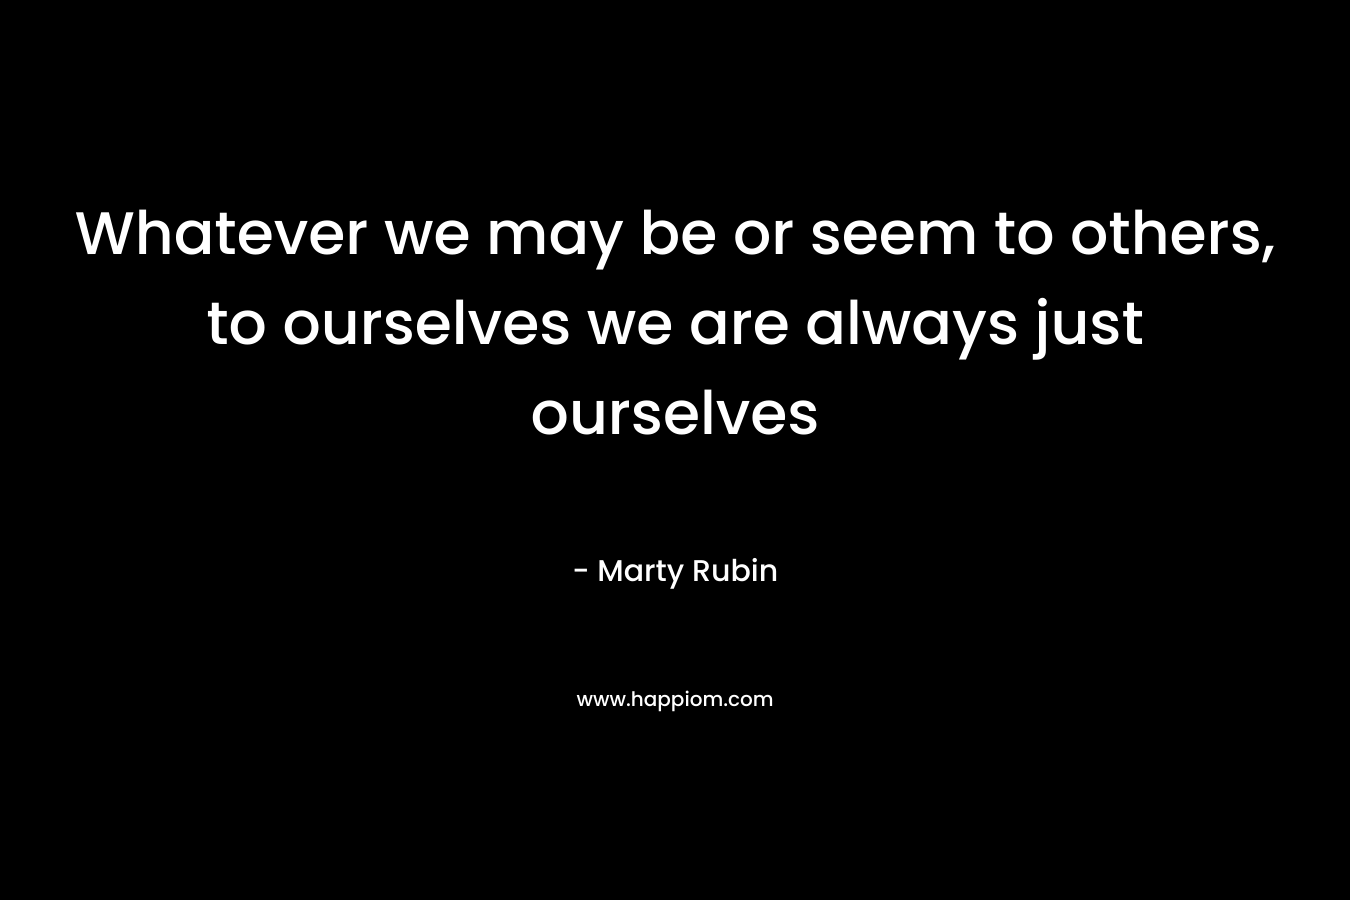 Whatever we may be or seem to others, to ourselves we are always just ourselves